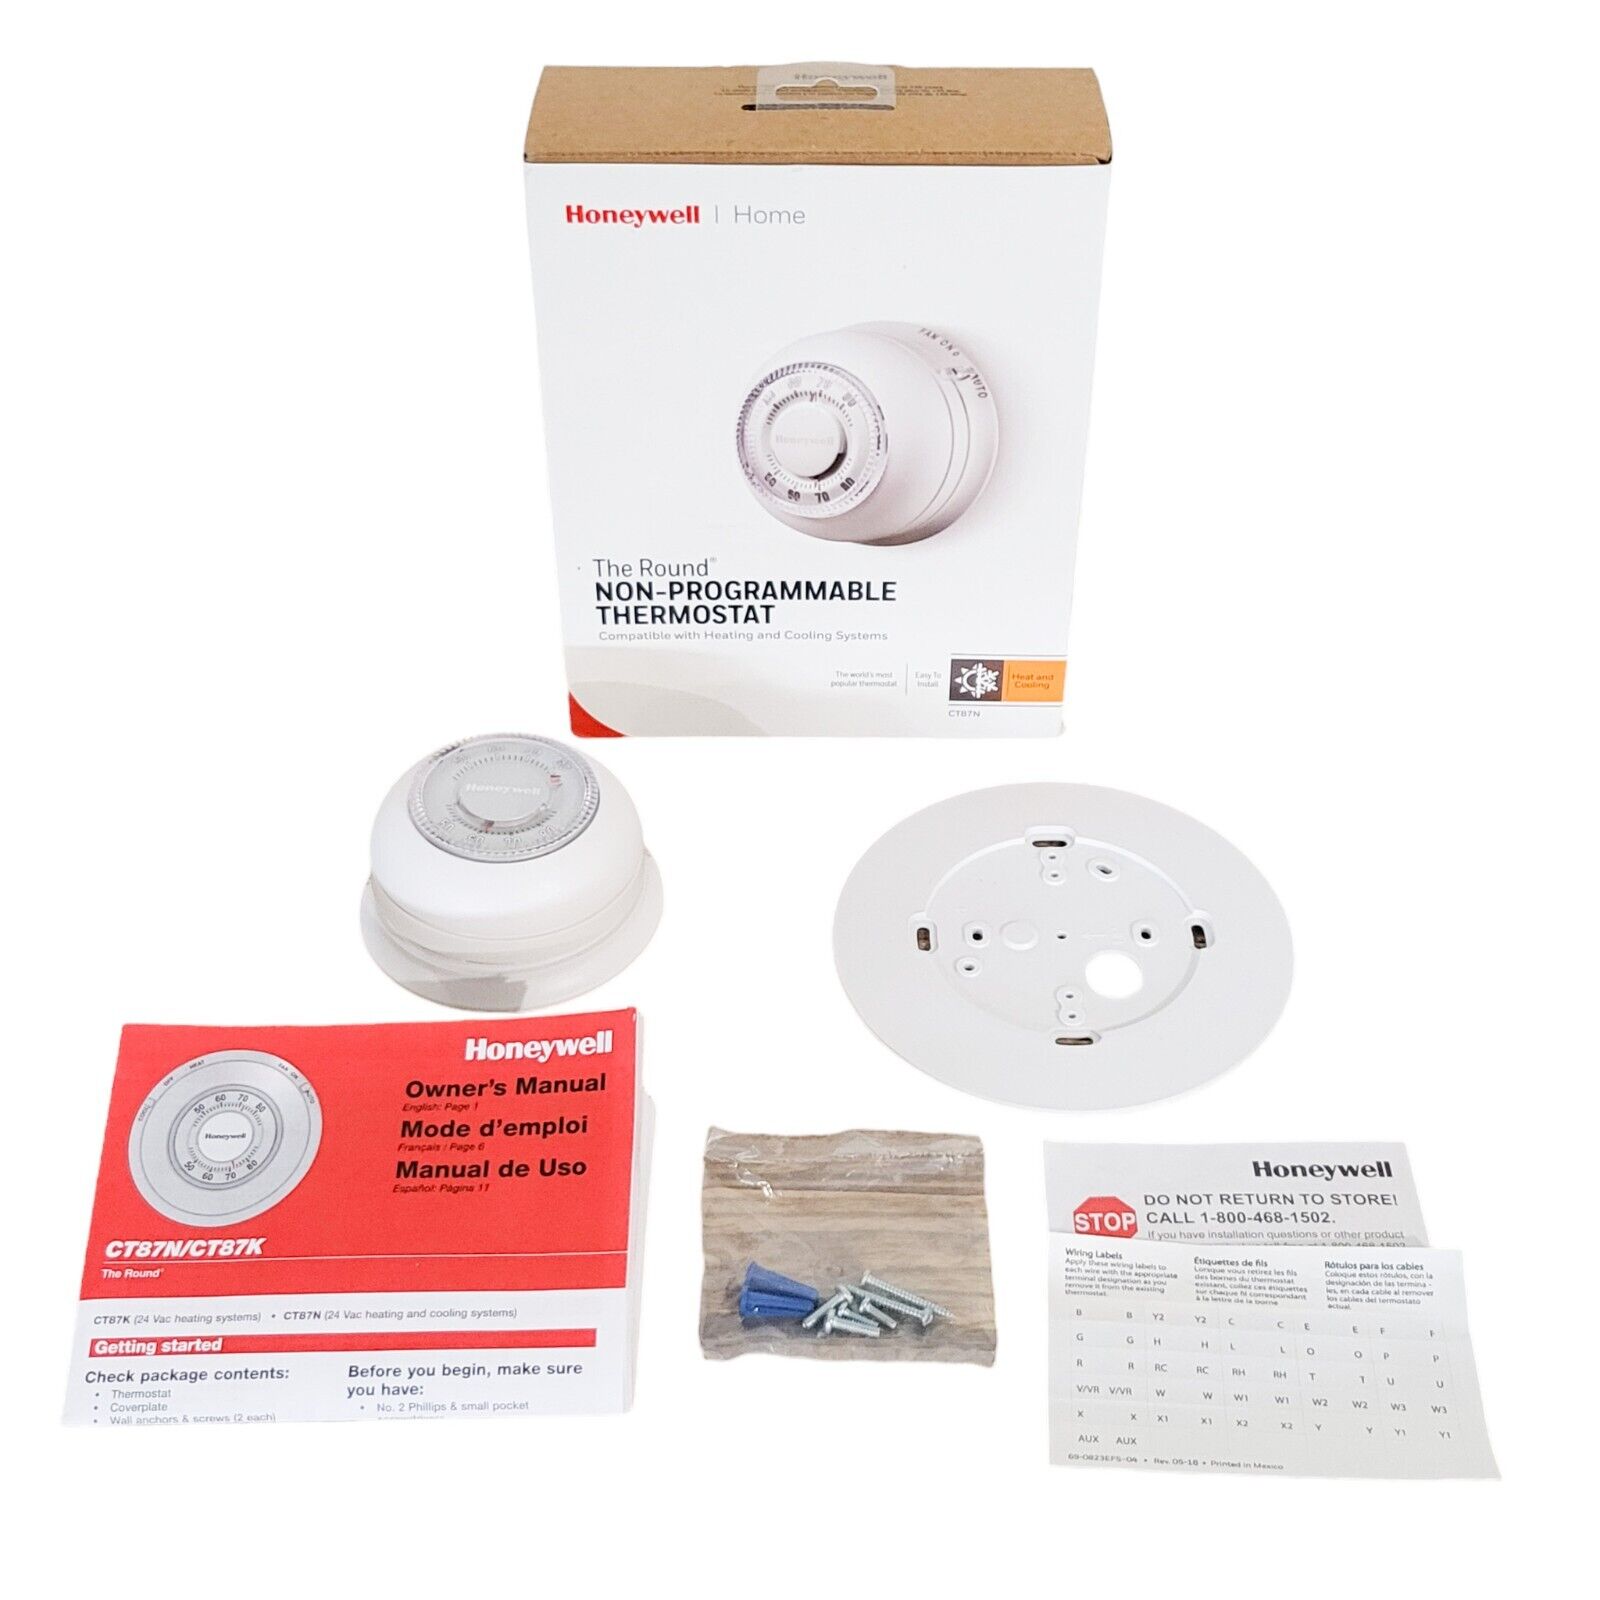 Honeywell Home CT87N Thermostat Round Non-Programmable New Open Box Heat/Cool